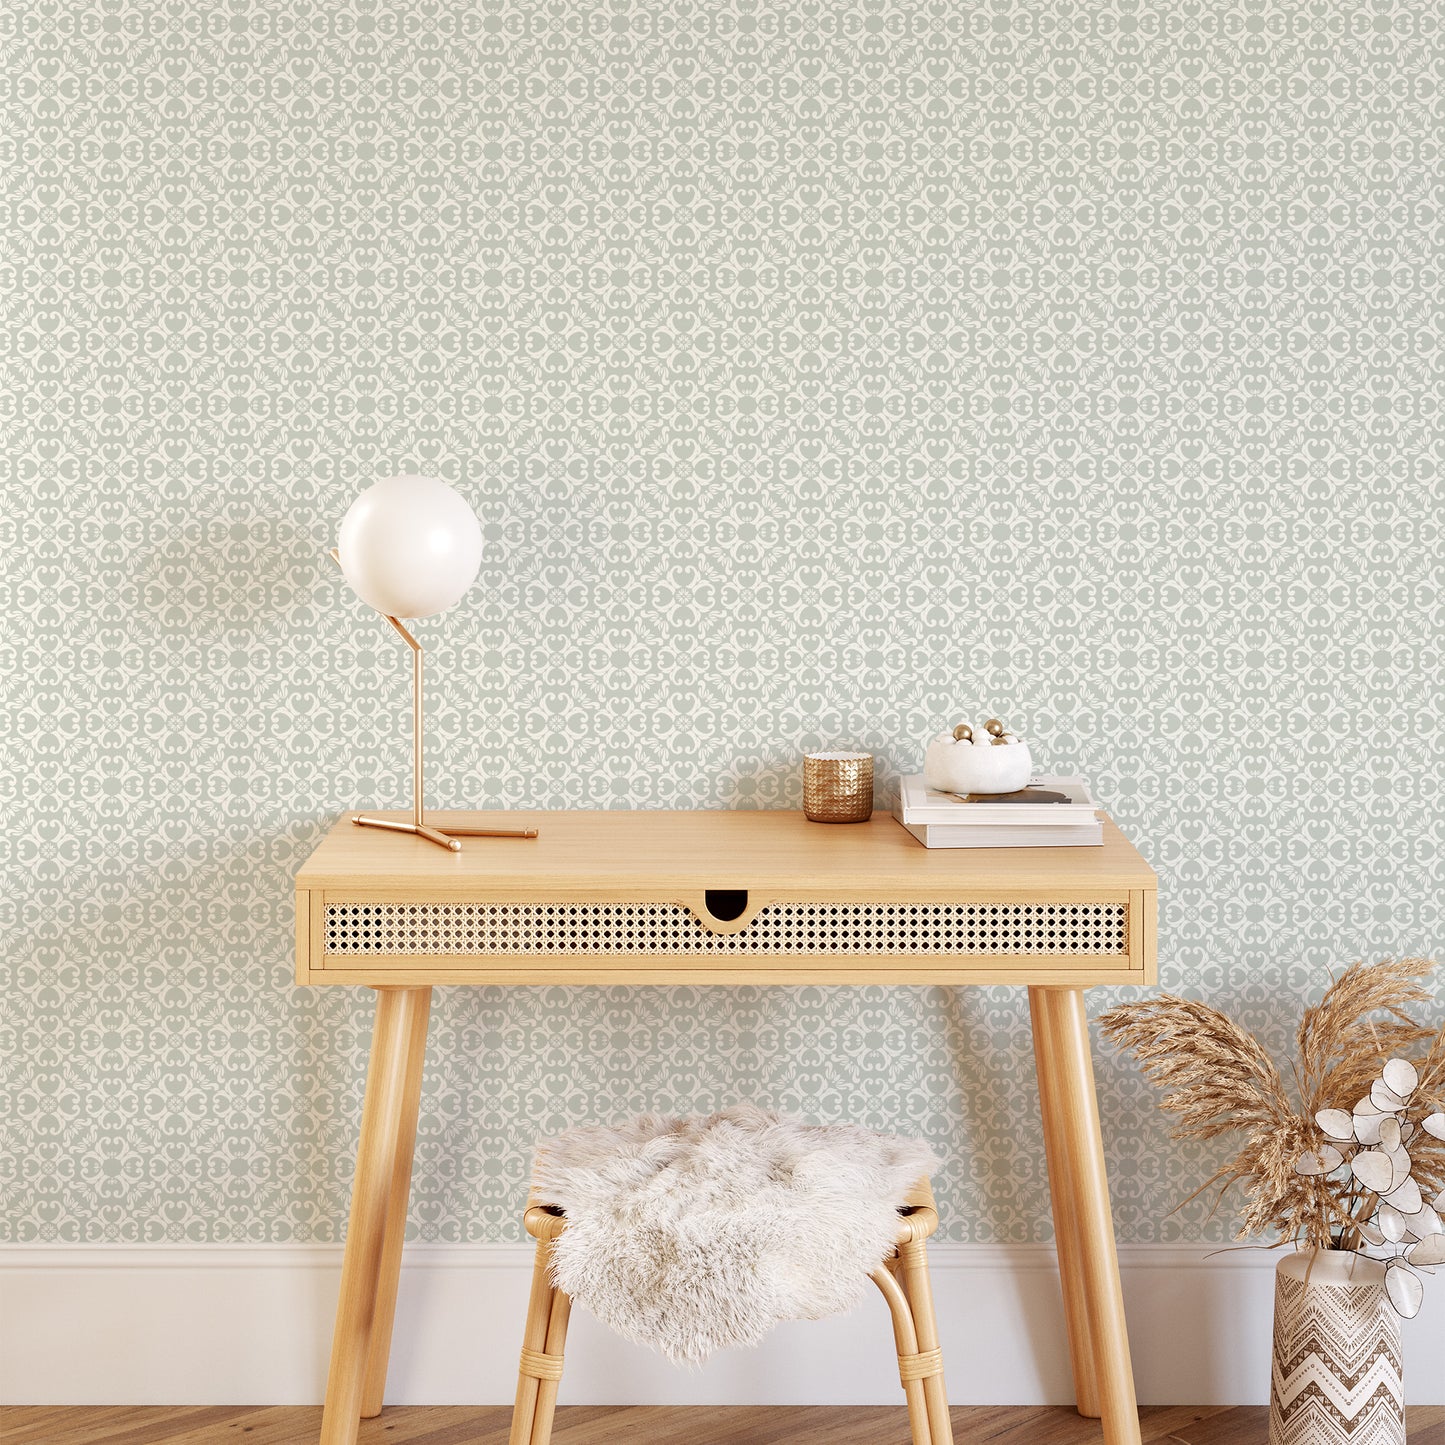 Ayara's peel and stick removable Spanish Tiles Wallpaper in Sage featured in an office.